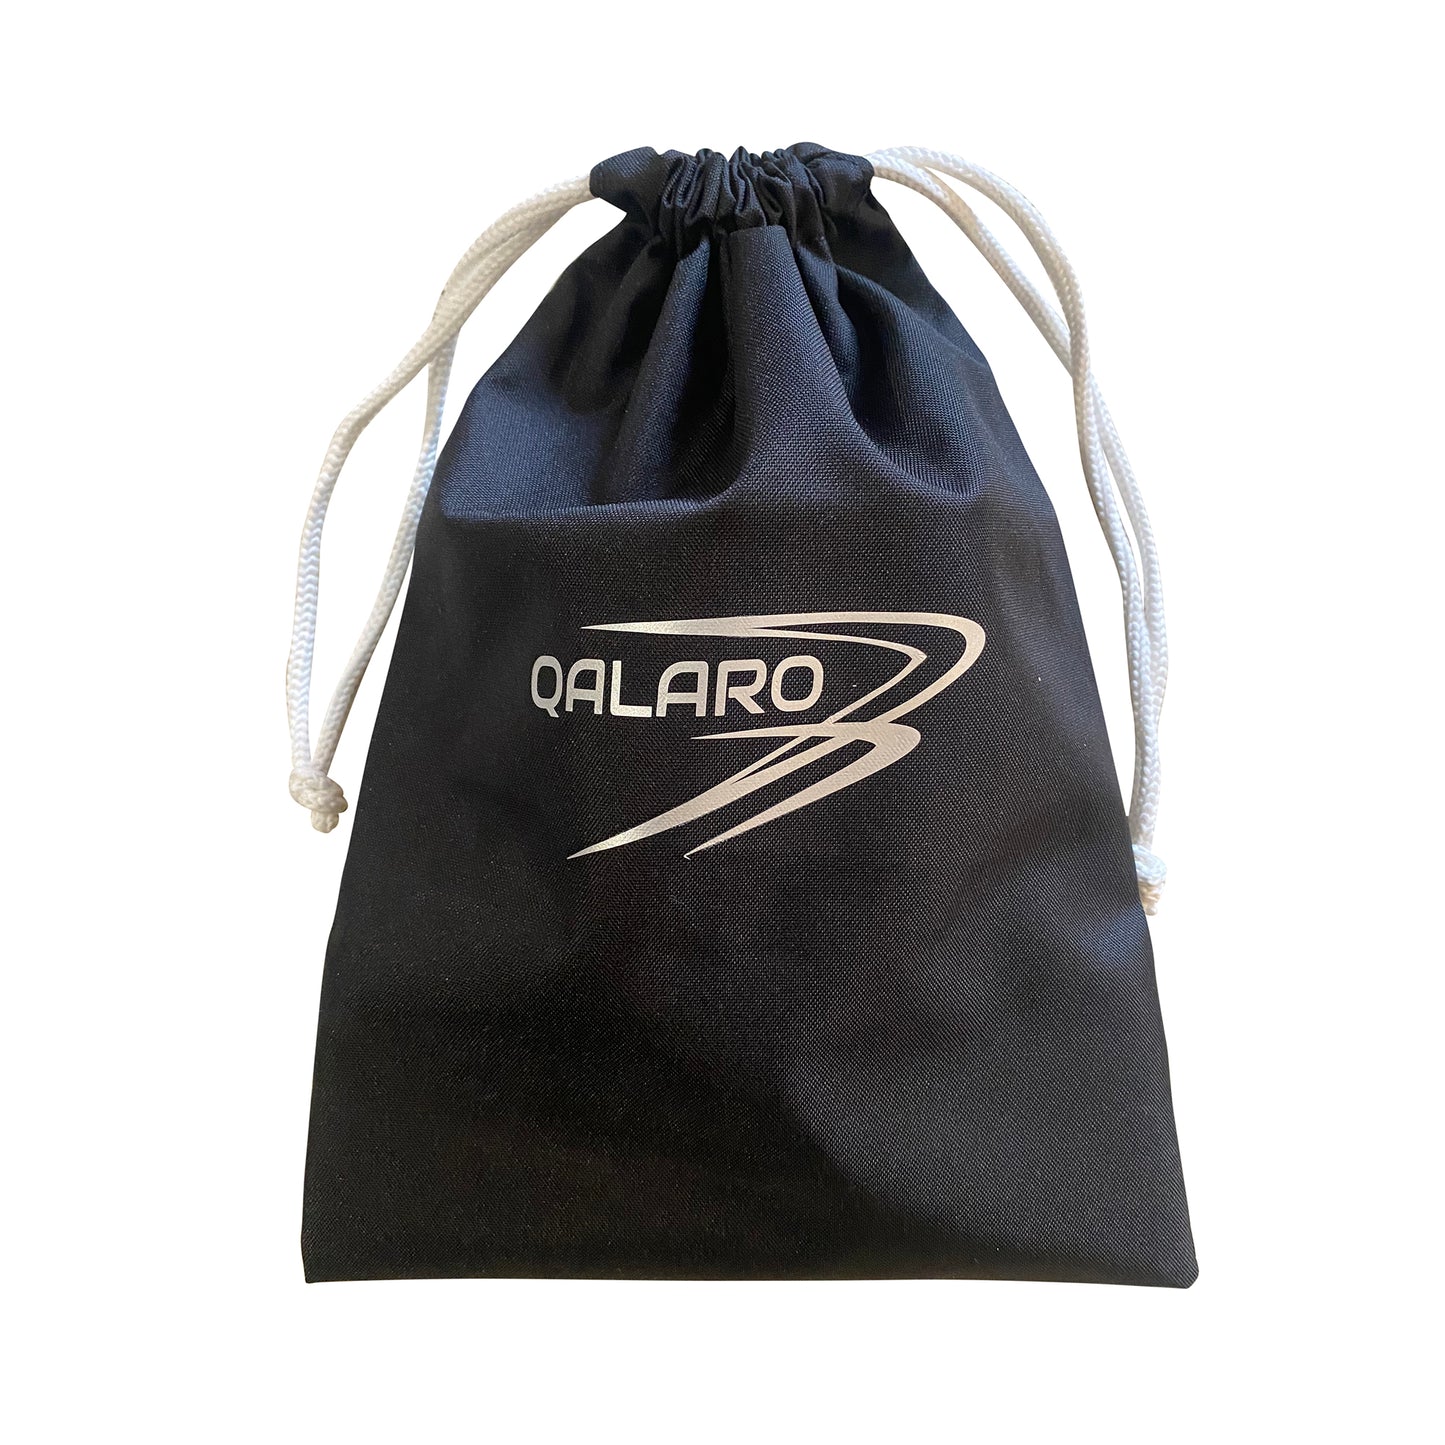 QALARO PRO Double Buckle Grips for Girl's Gymnastics with White Cotton Wristbands and Gripbag